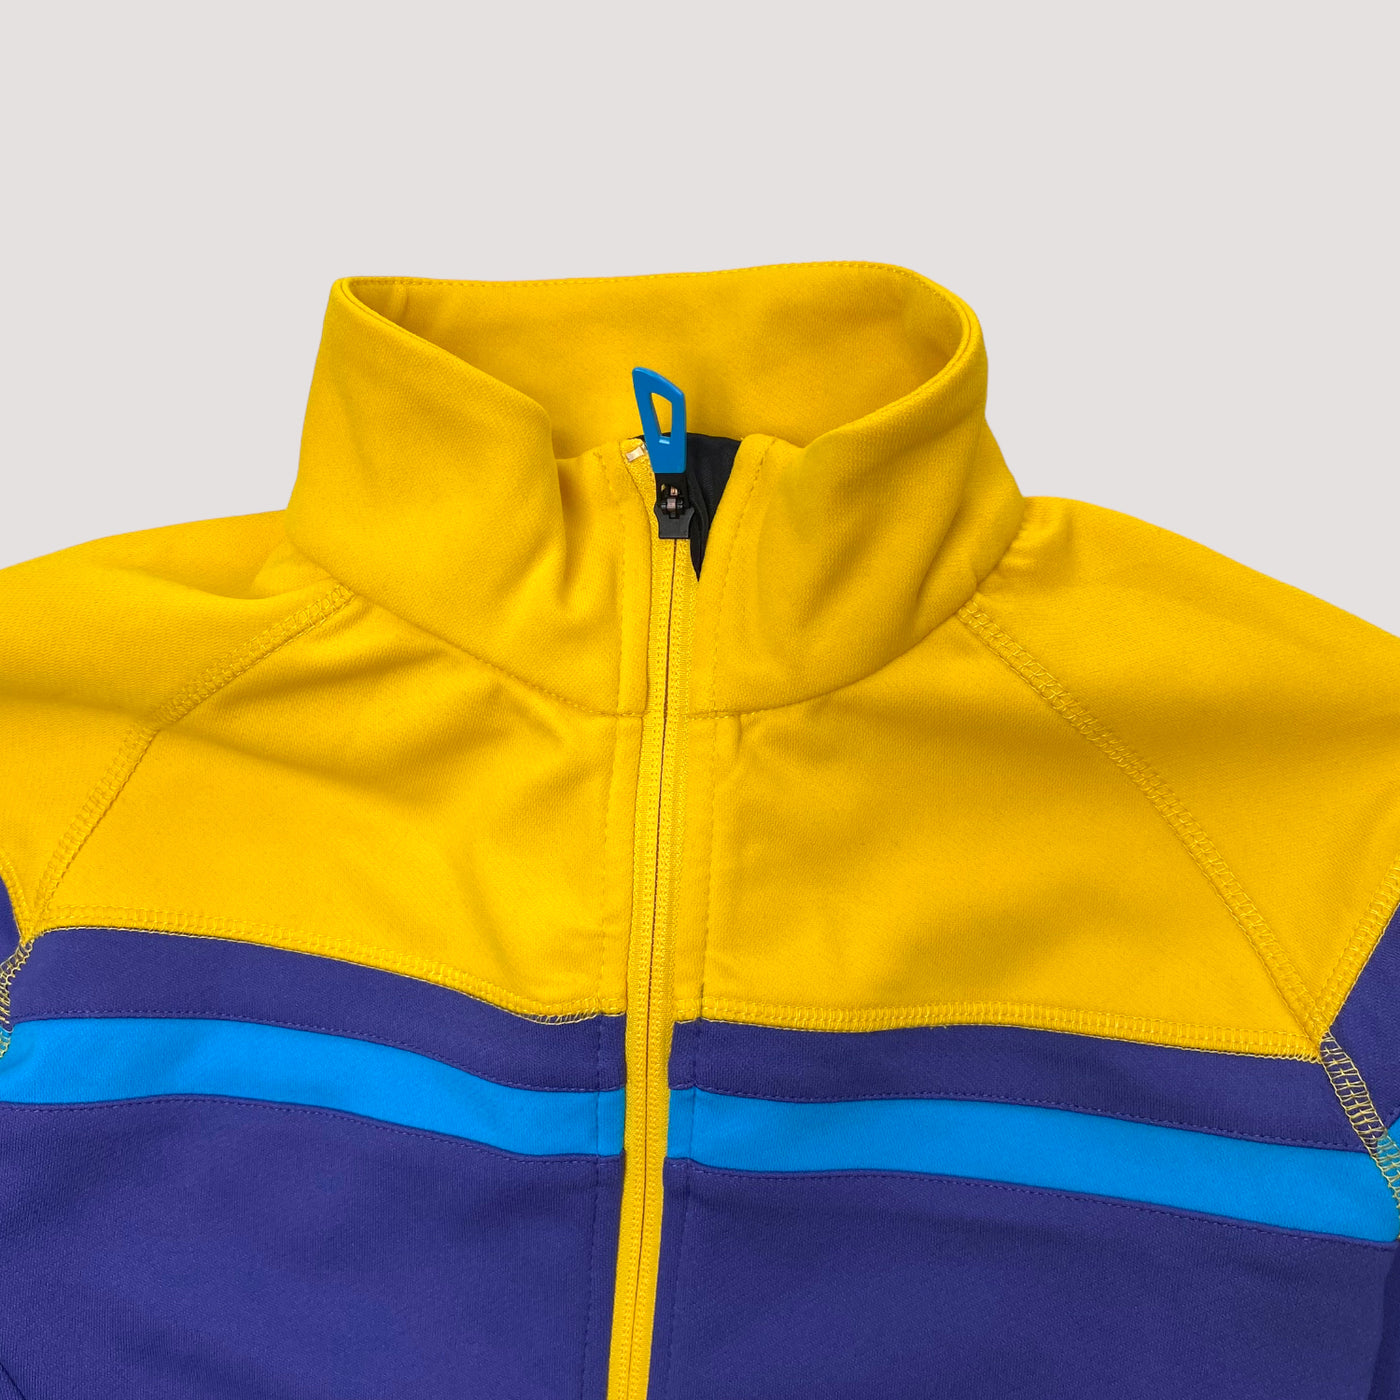 track suit jacket, yellow-royal blue | woman 38